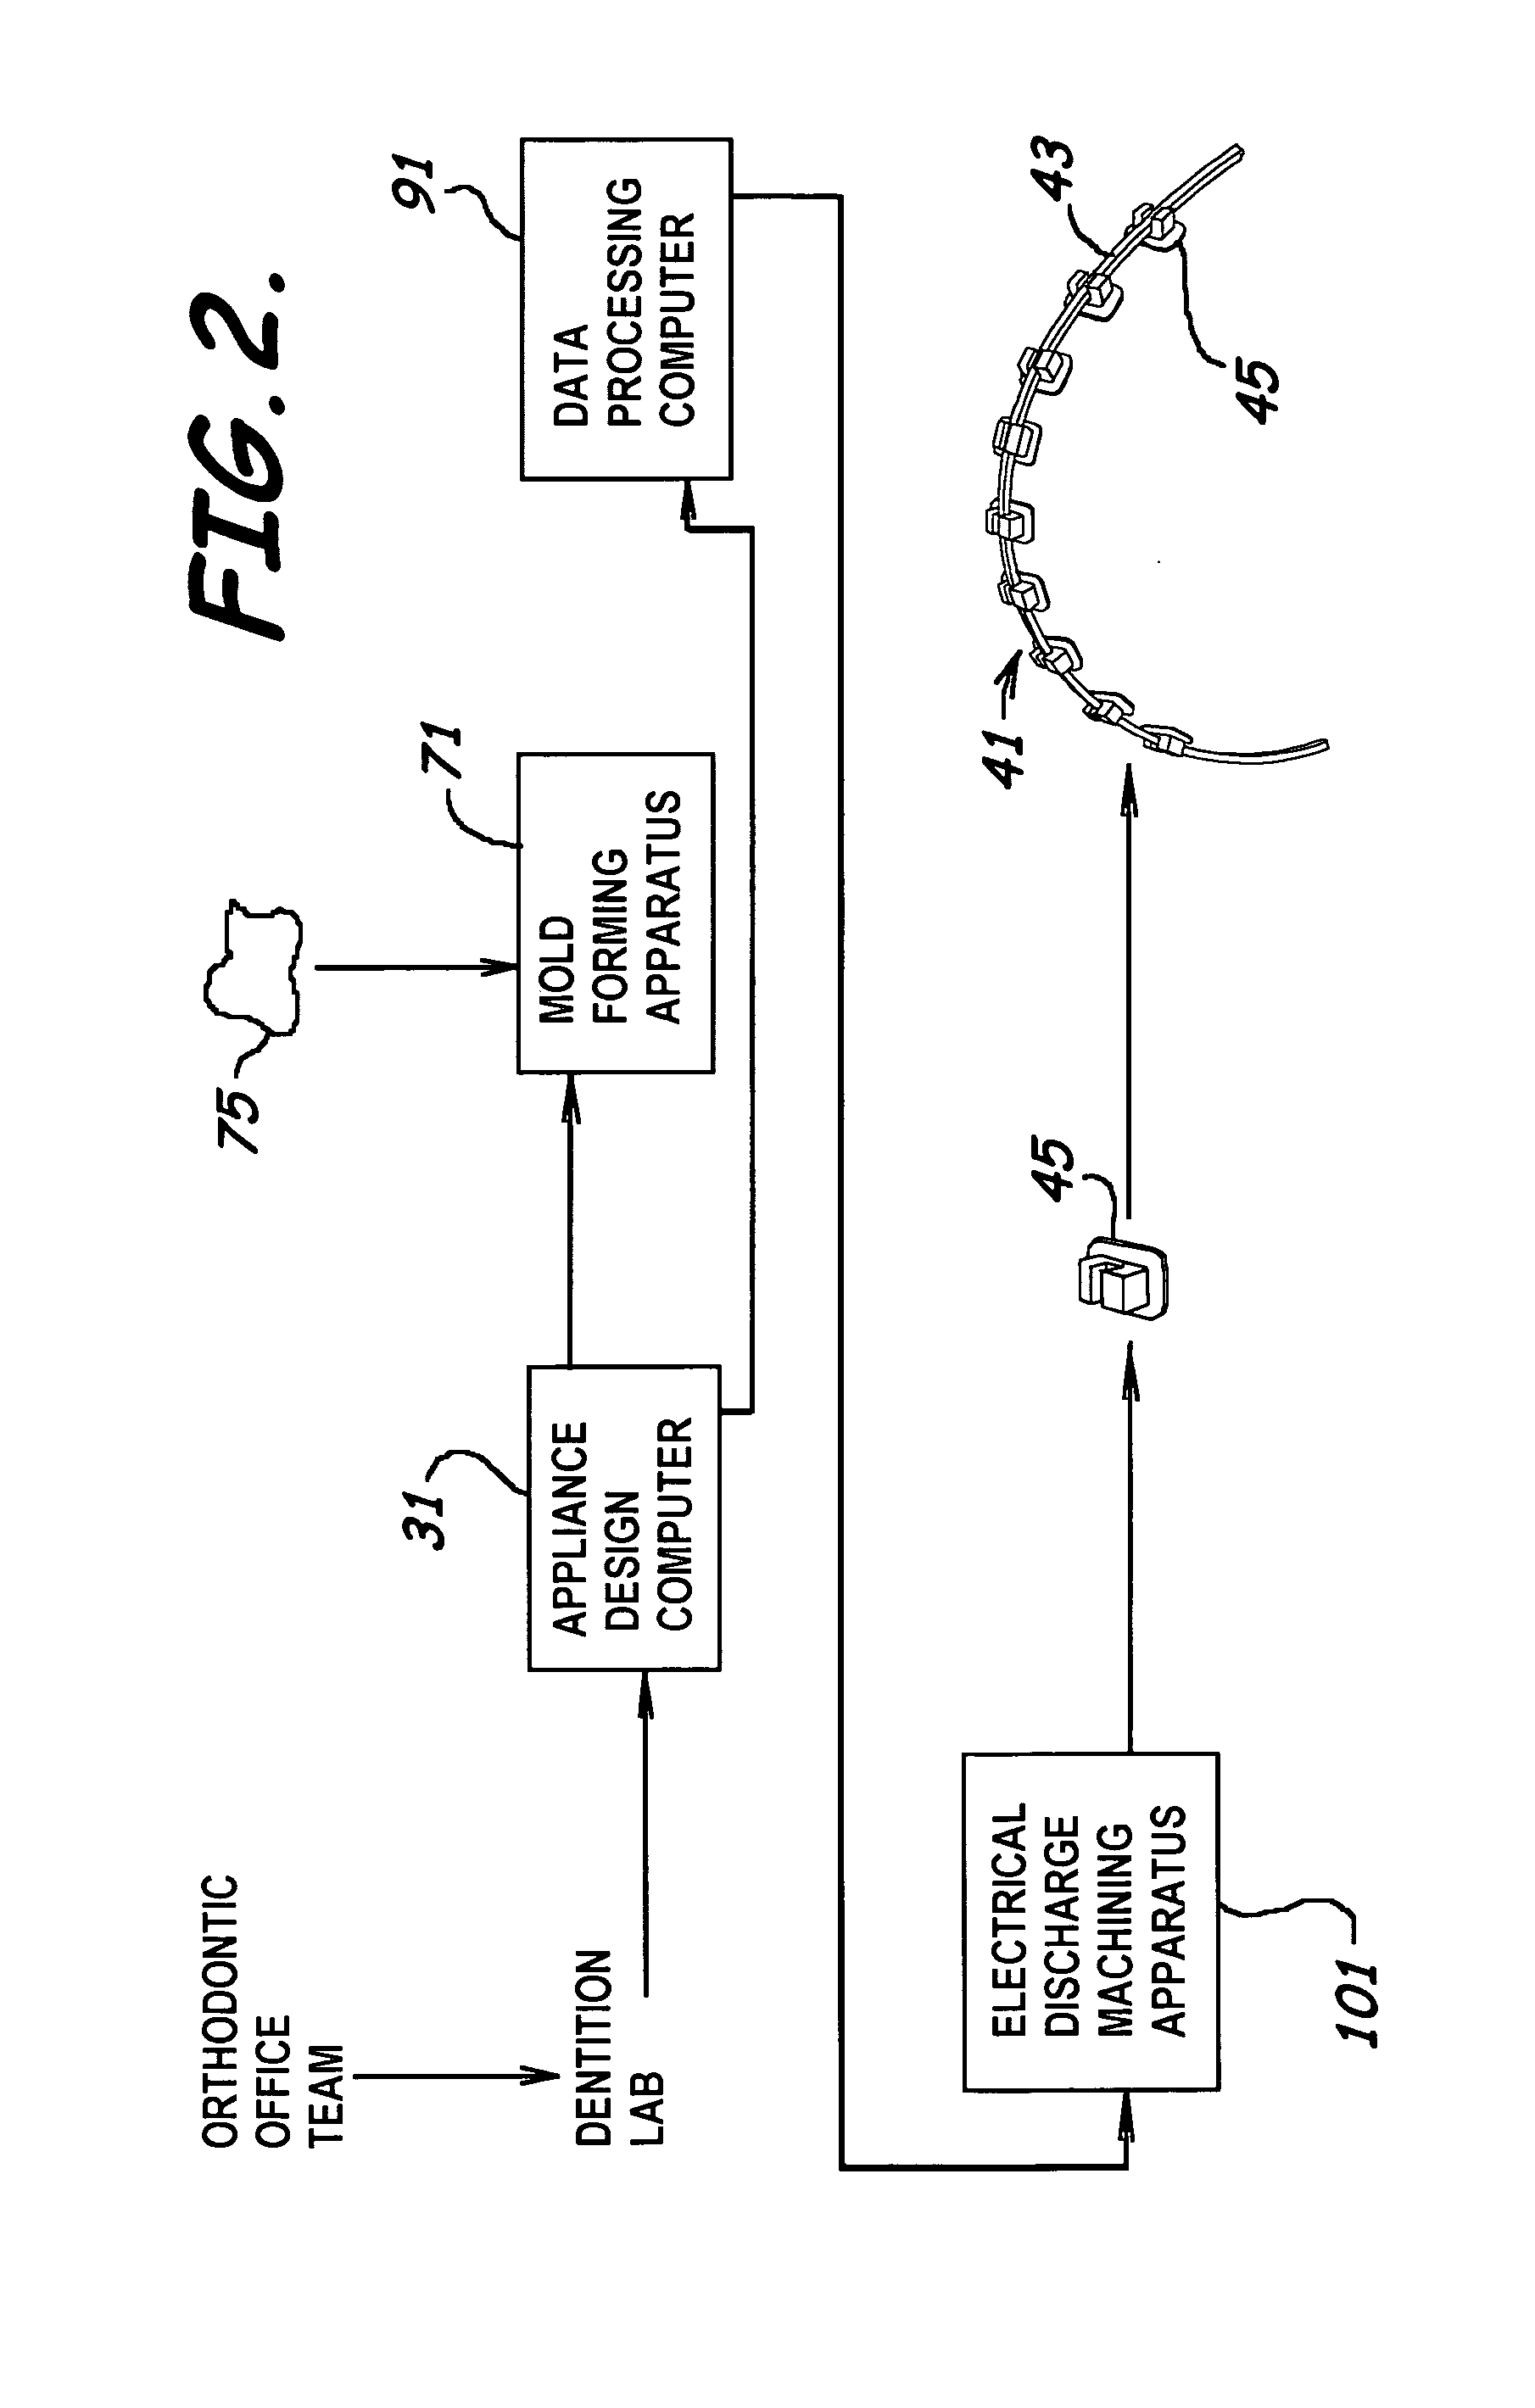 System to manufacture custom orthodontic appliances, program product, and related methods